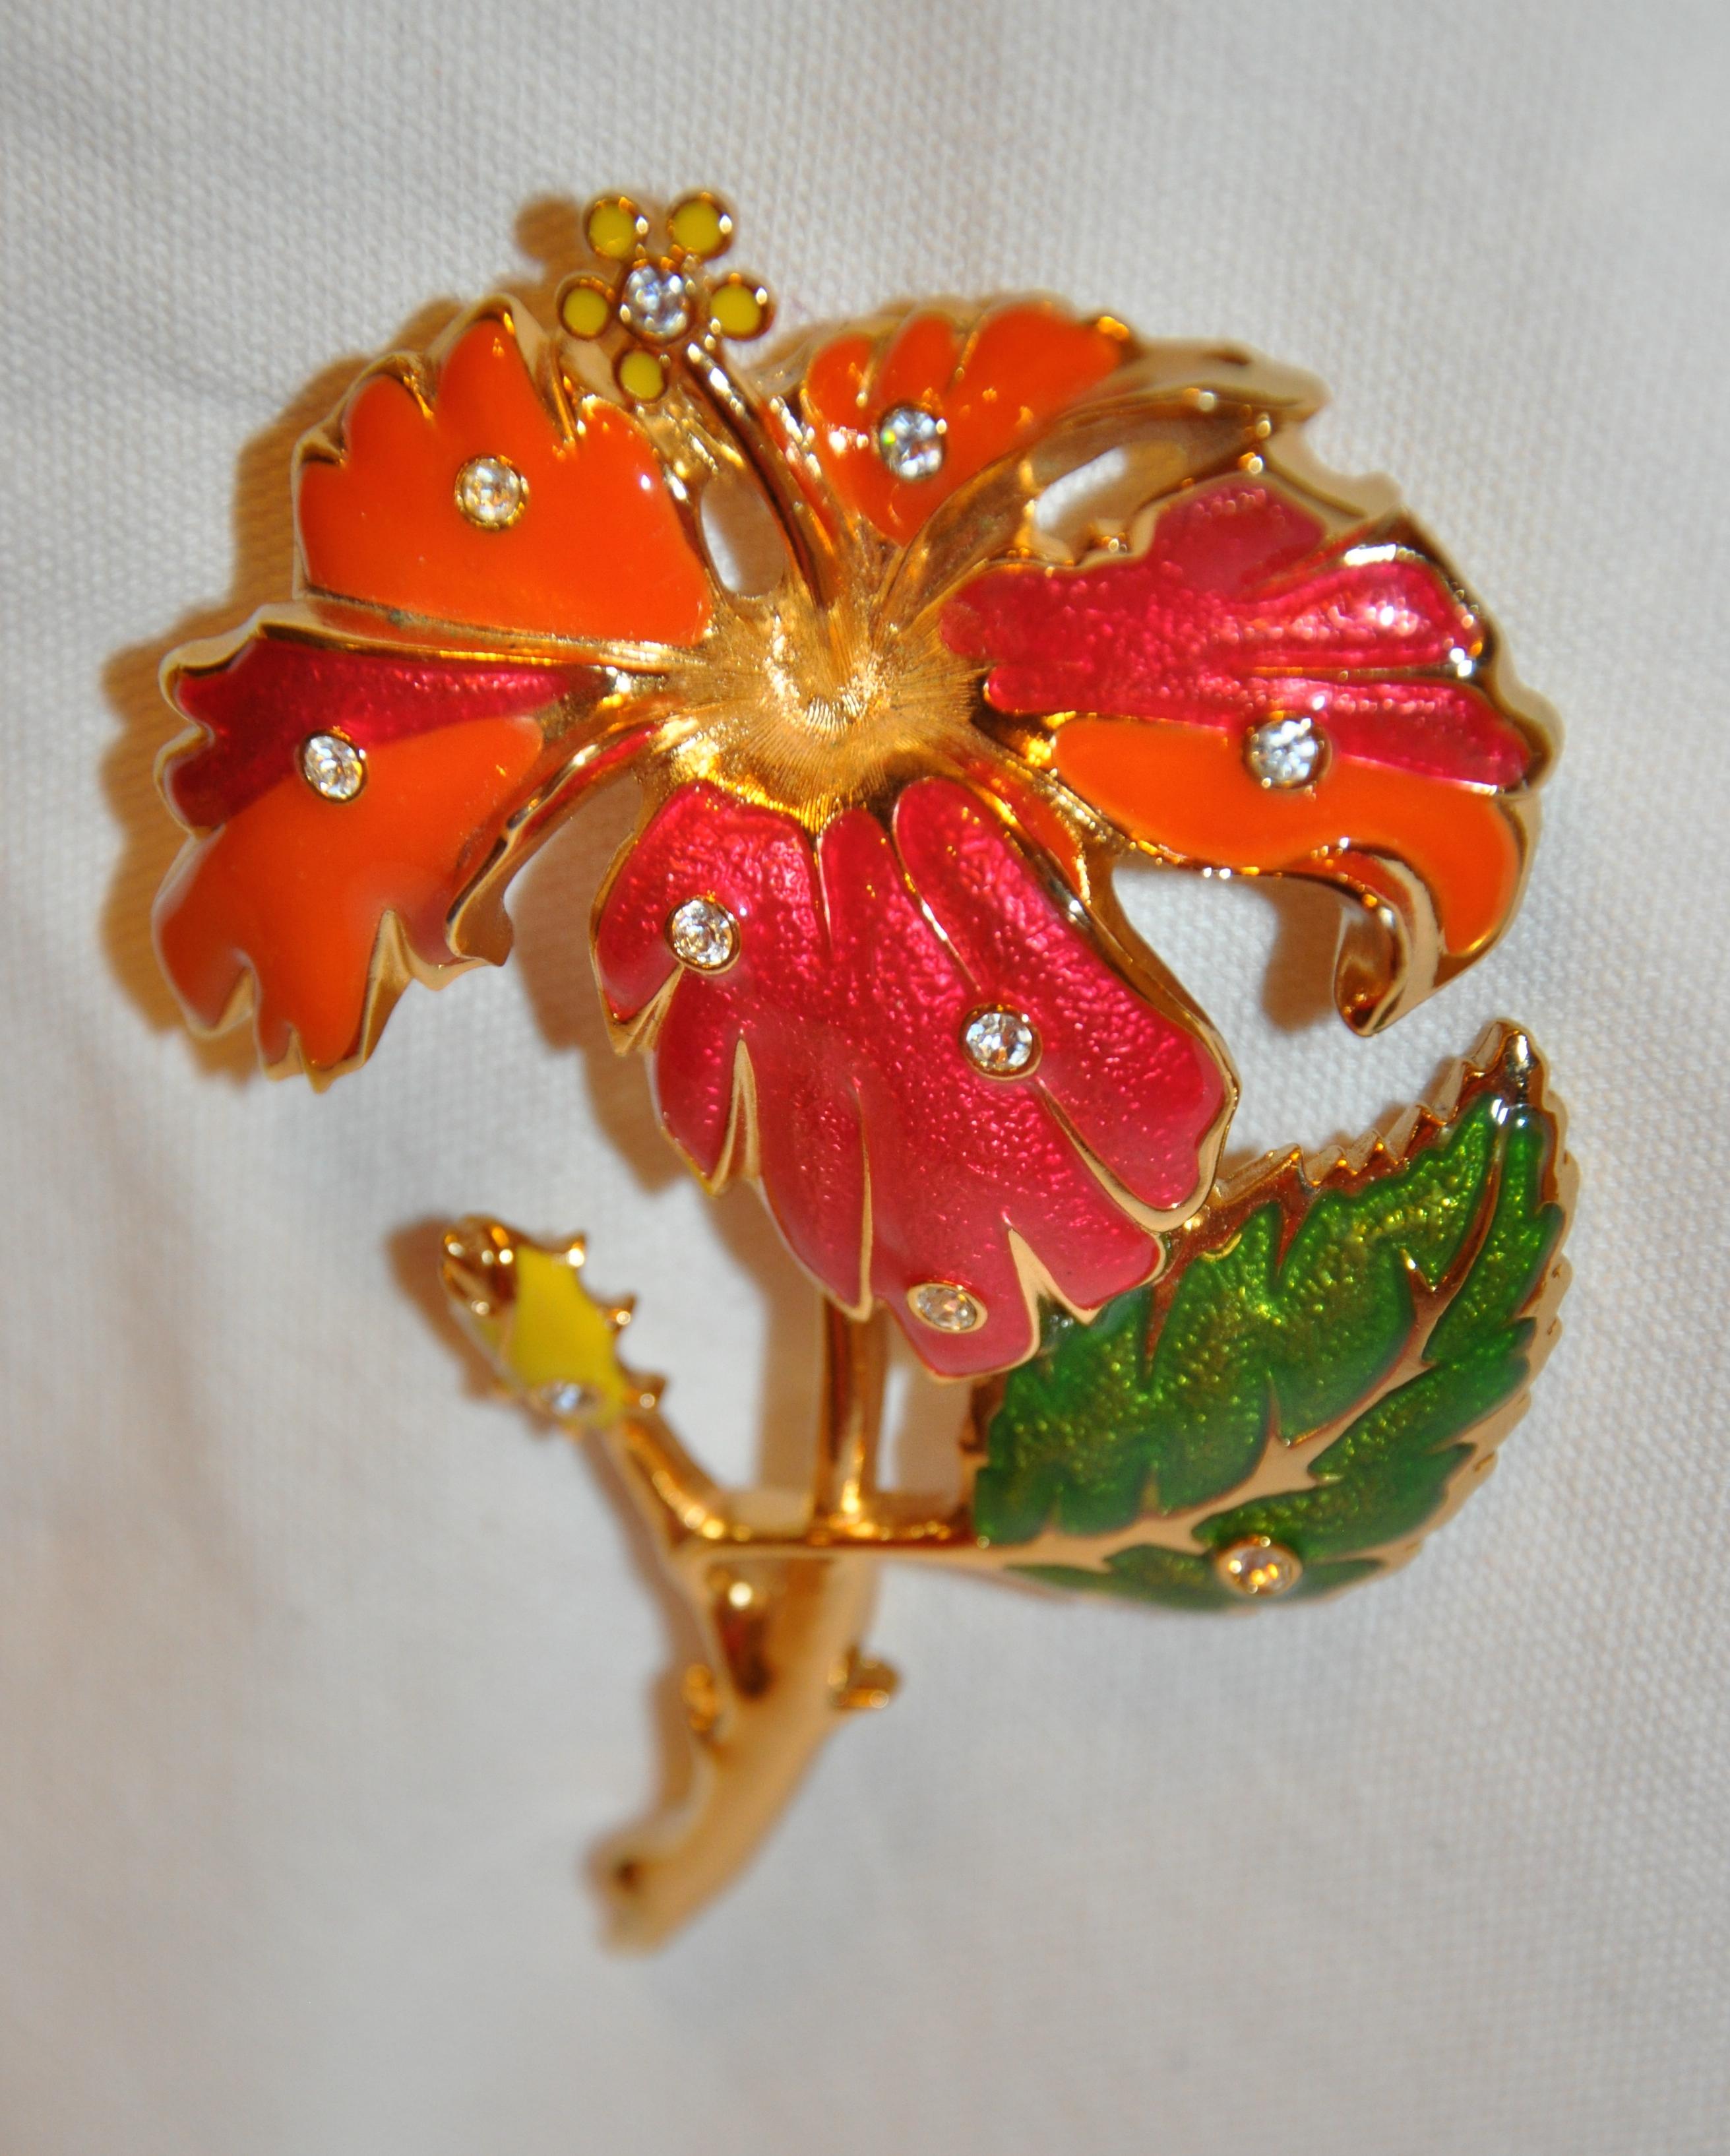        Barrego wonderfully huge multicolor whimsical floral gilded gold vermeil hardware scattered with faux diamonds throughout. Vivid colors of tangerine, cranberry, greens, and yellow, with etched floral-center. Etched with the designer's name in